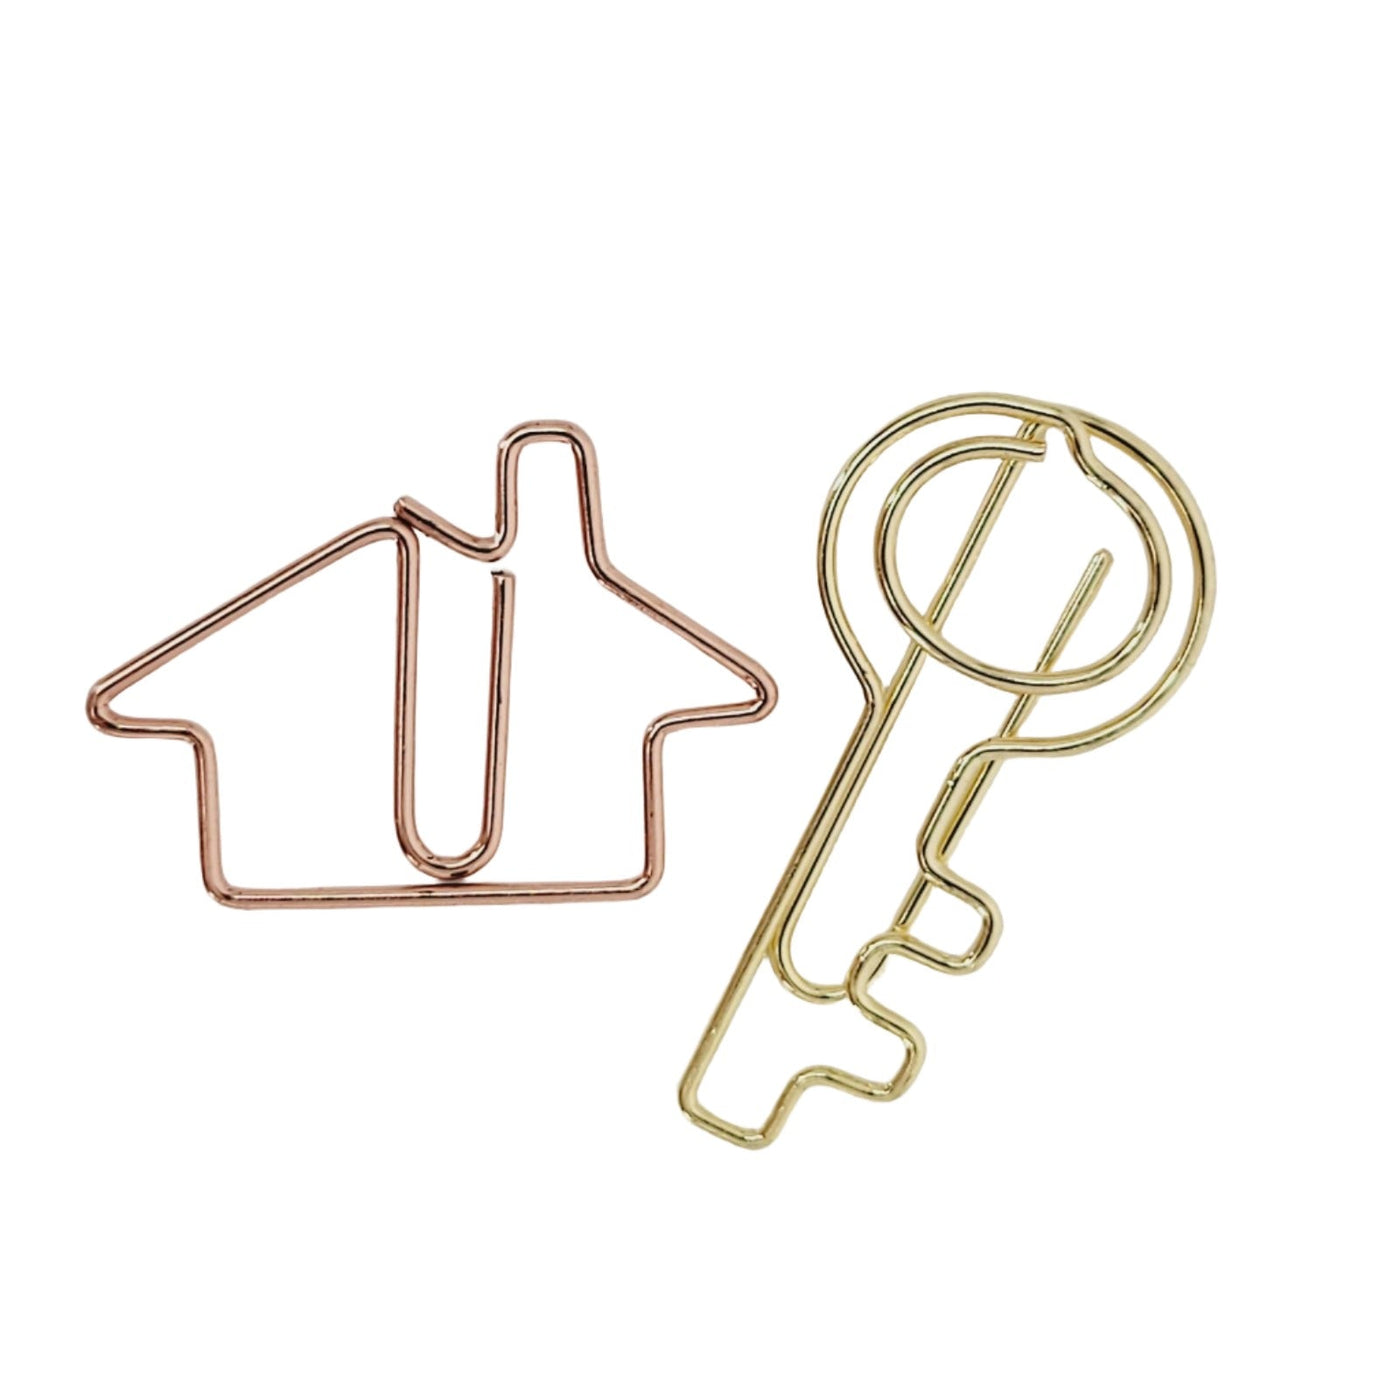 House & Key Shaped Paper Clips - All Things Real Estate